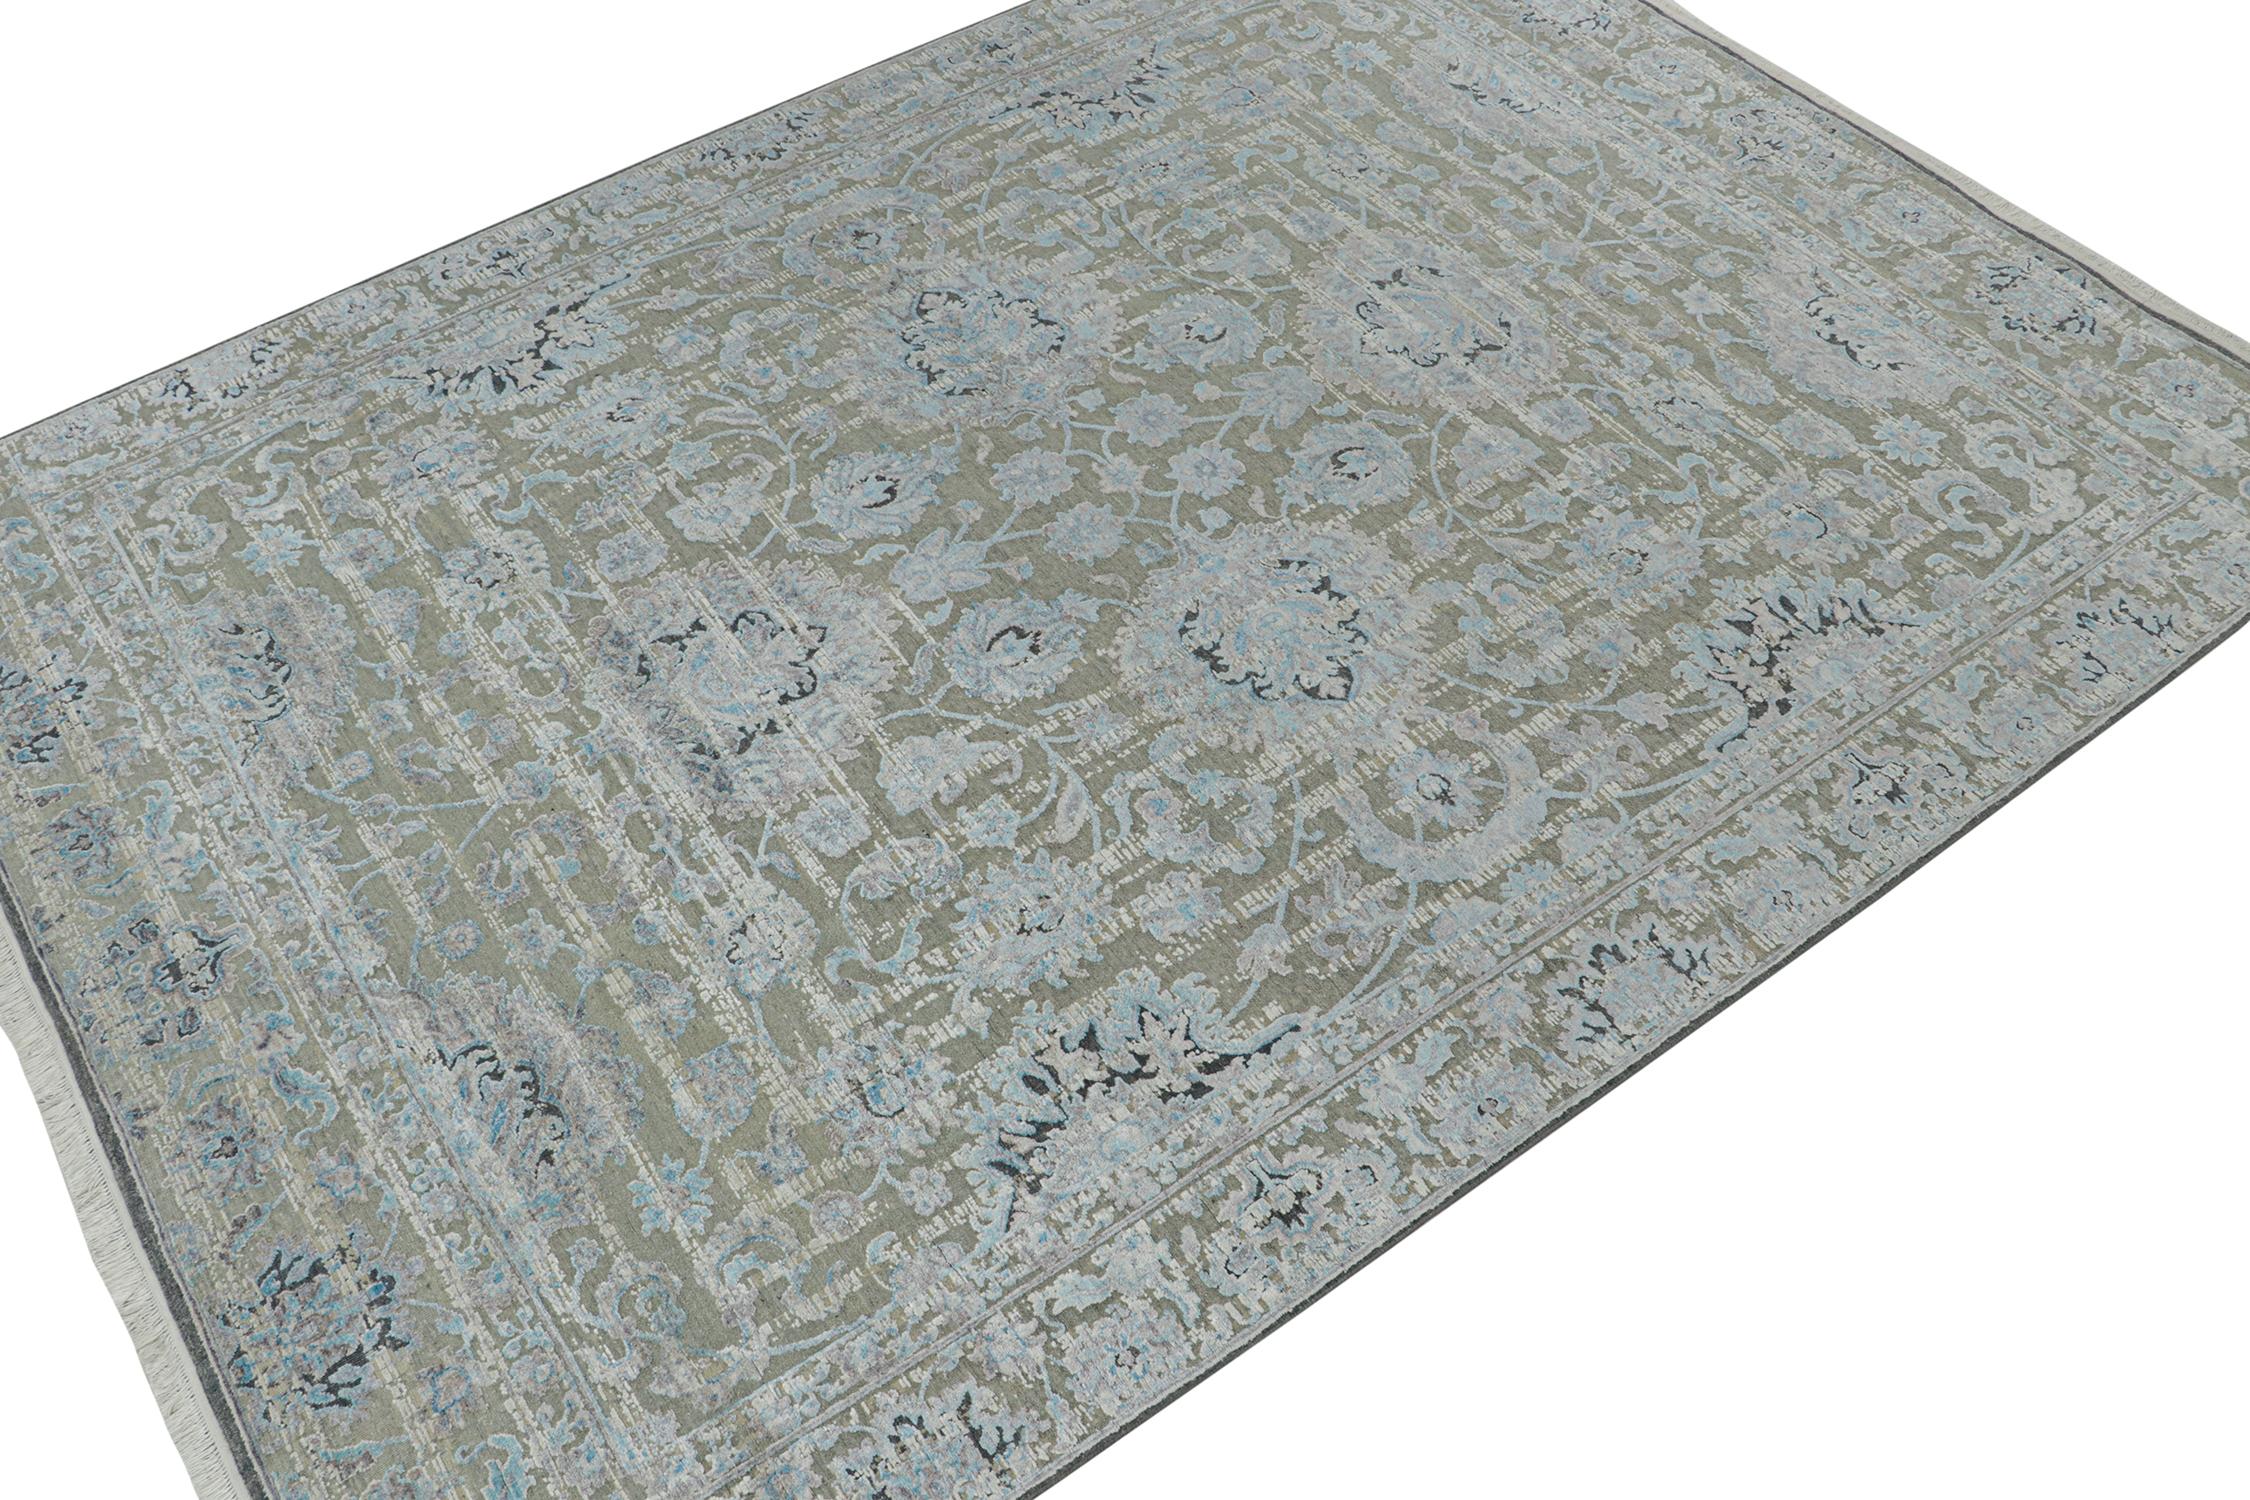 A 9×12 rug inspired from traditional rug styles, from Rug & Kilim’s Modern Classics Collection. Hand knotted in silk, playing a confluence of gray and blue floral patterns with classic grace.

Further On the Design:

This piece remarks a unique